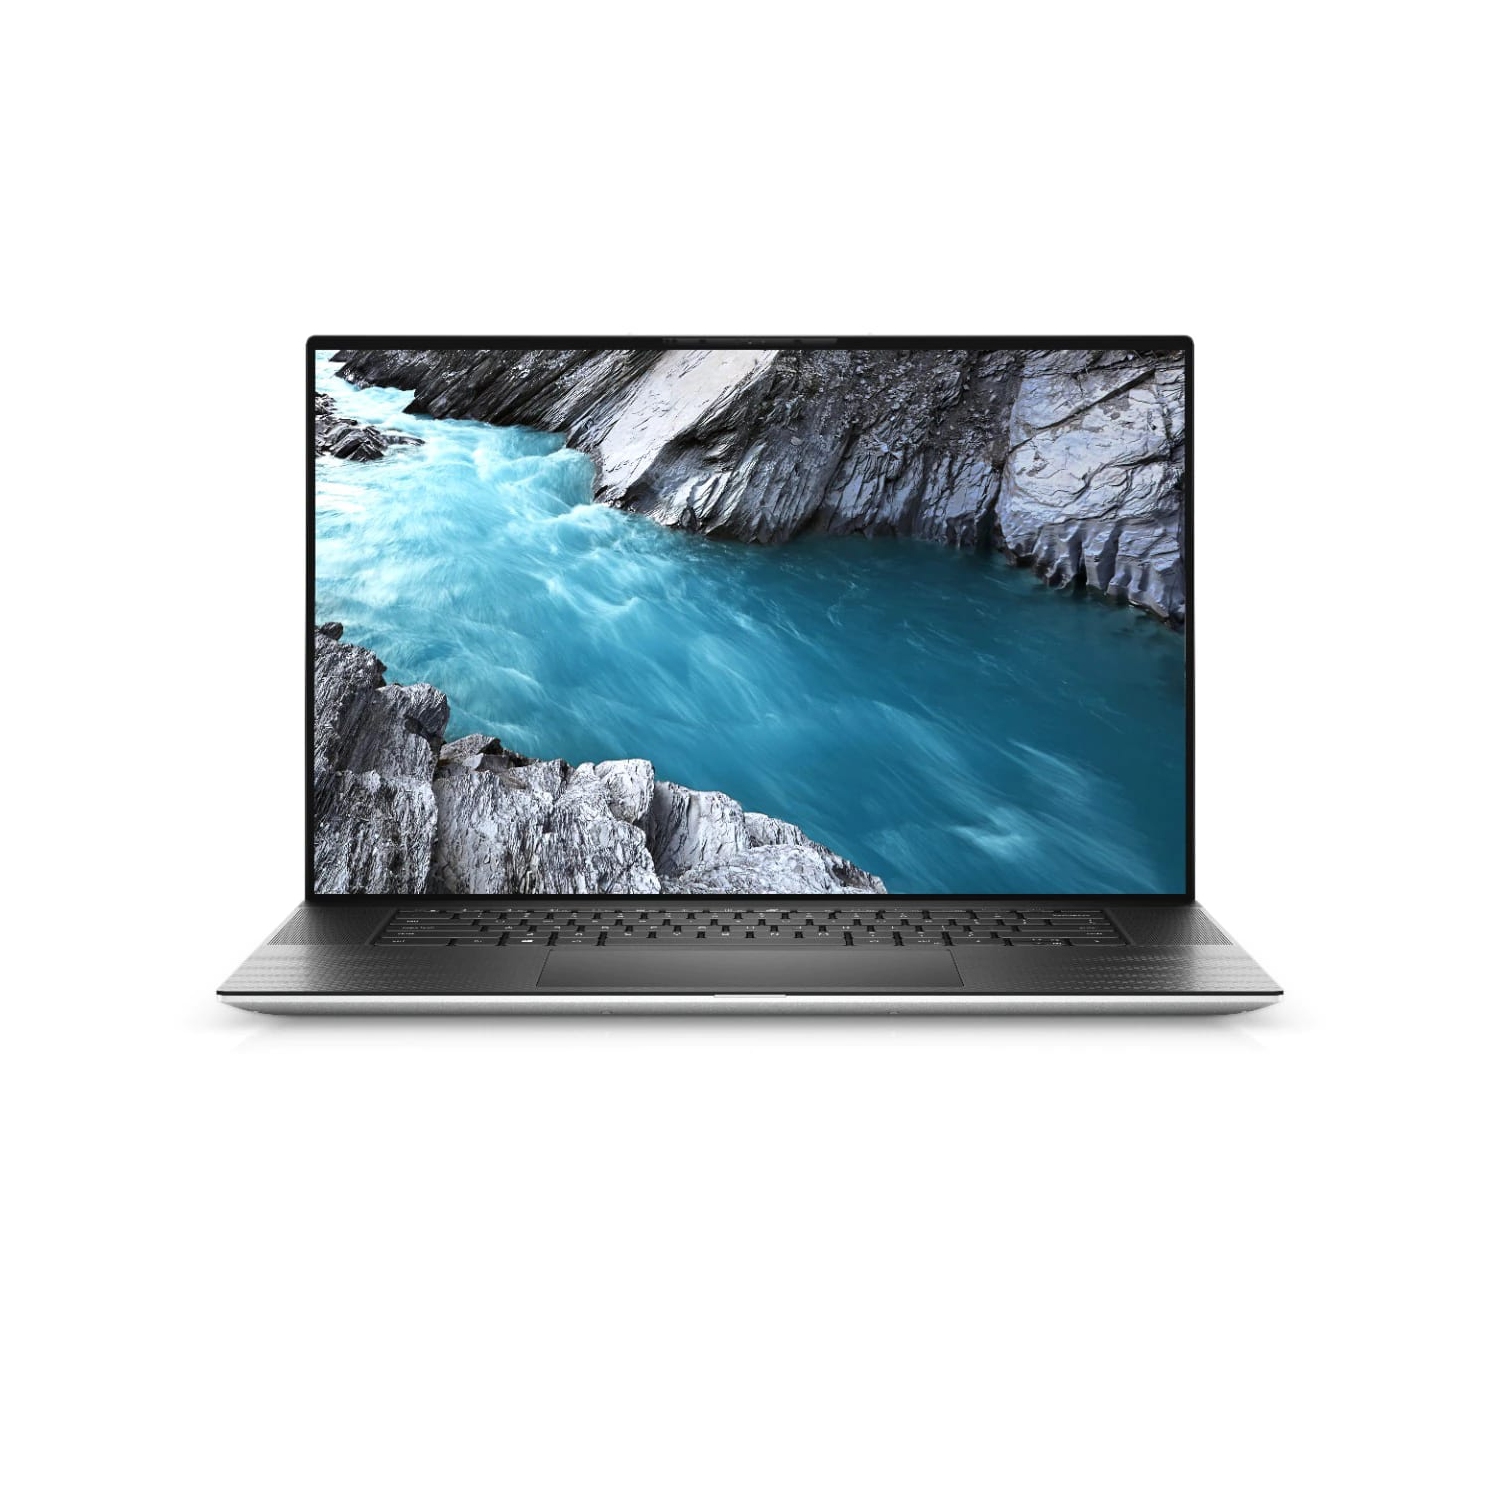 Refurbished (Excellent) - Dell XPS 17 9700 Laptop (2020) | 17" FHD+ | Core i7 - 2TB SSD - 64GB RAM - RTX 2060 | 8 Cores @ 5.1 GHz - 10th Gen CPU Certified Refurbished